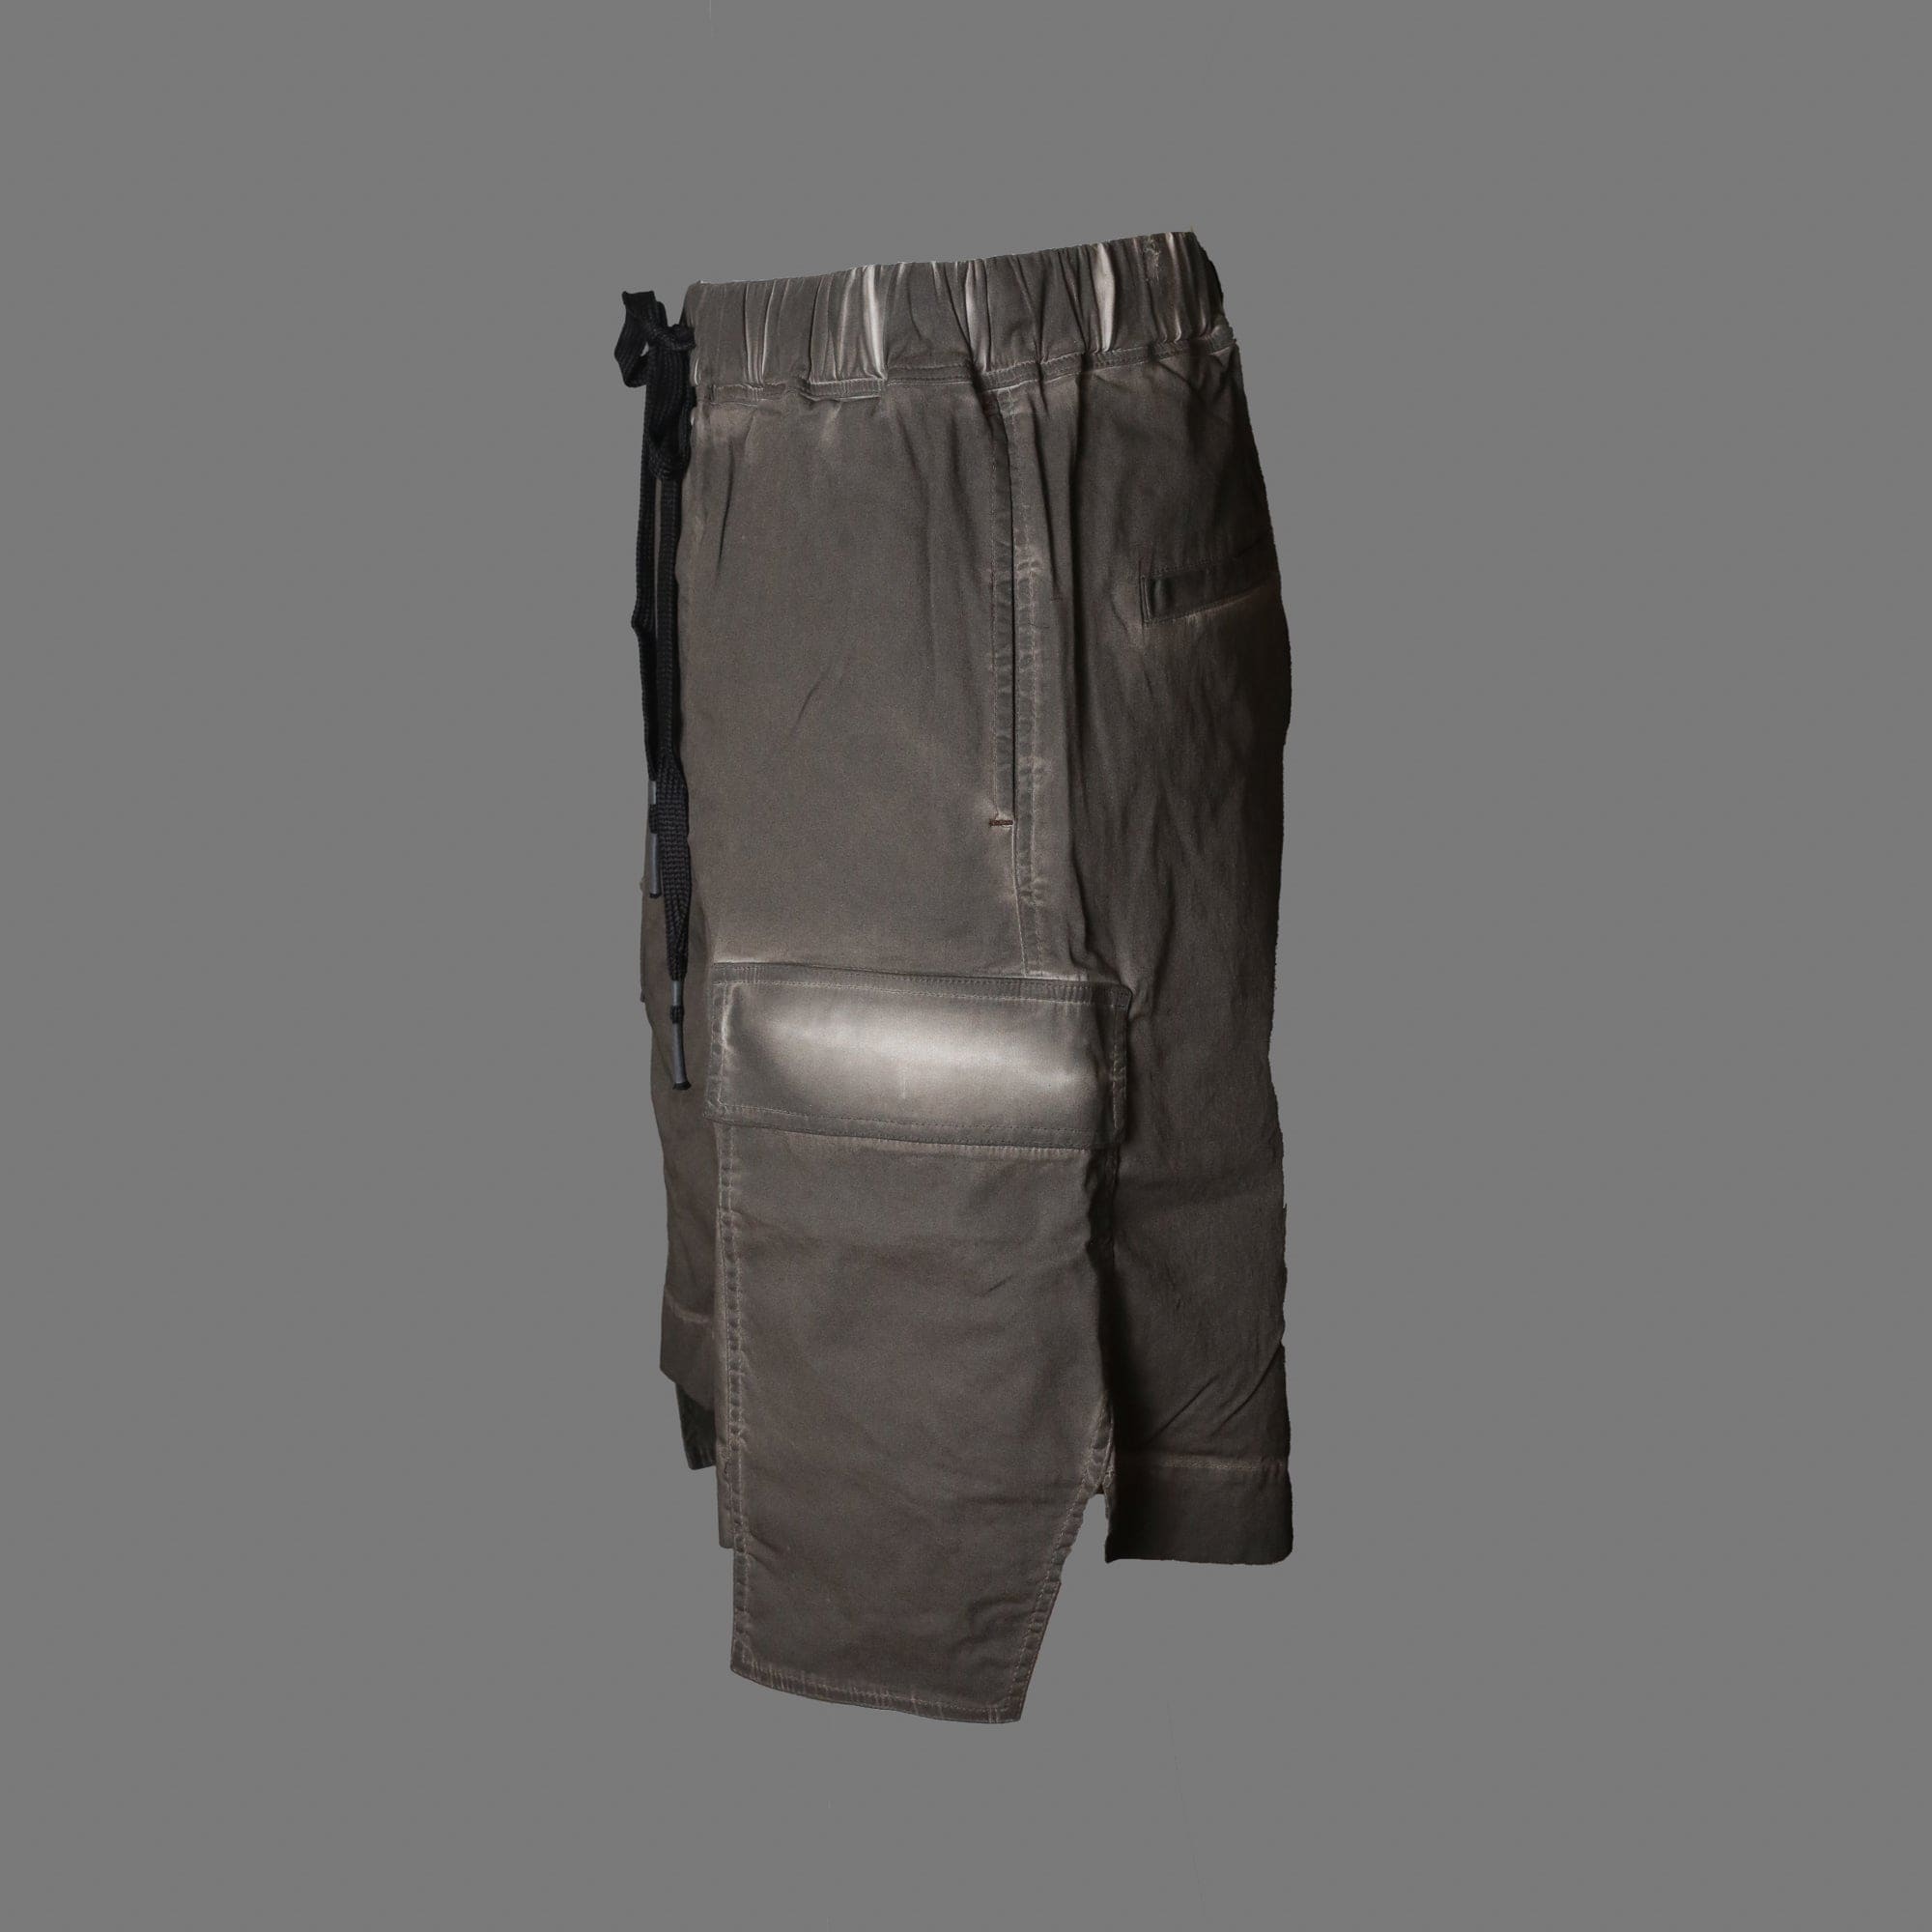 MD75 Shorts MD75 9255 Military